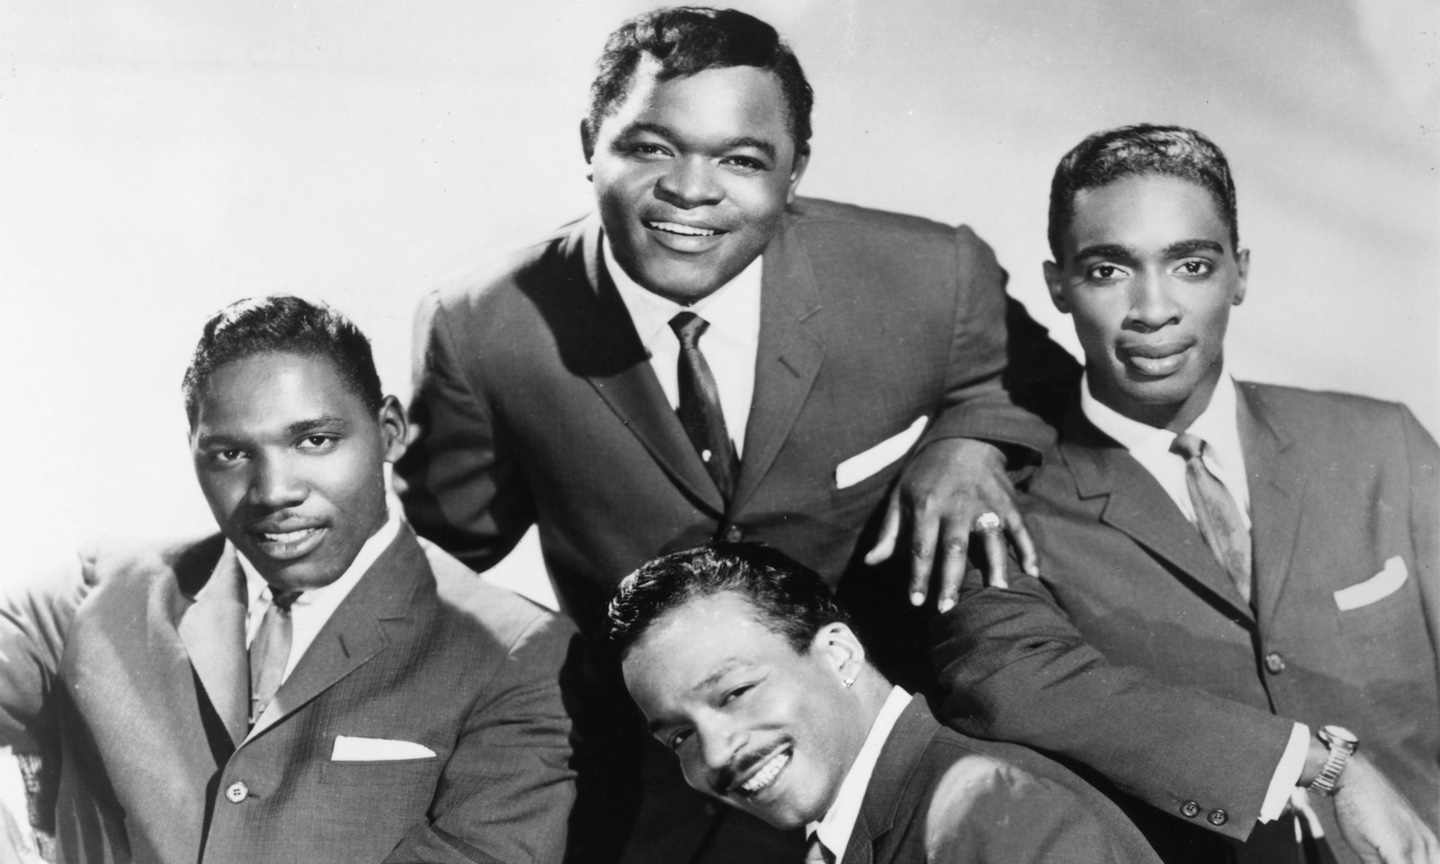 Charlie Thomas of the Drifters Dies at 85